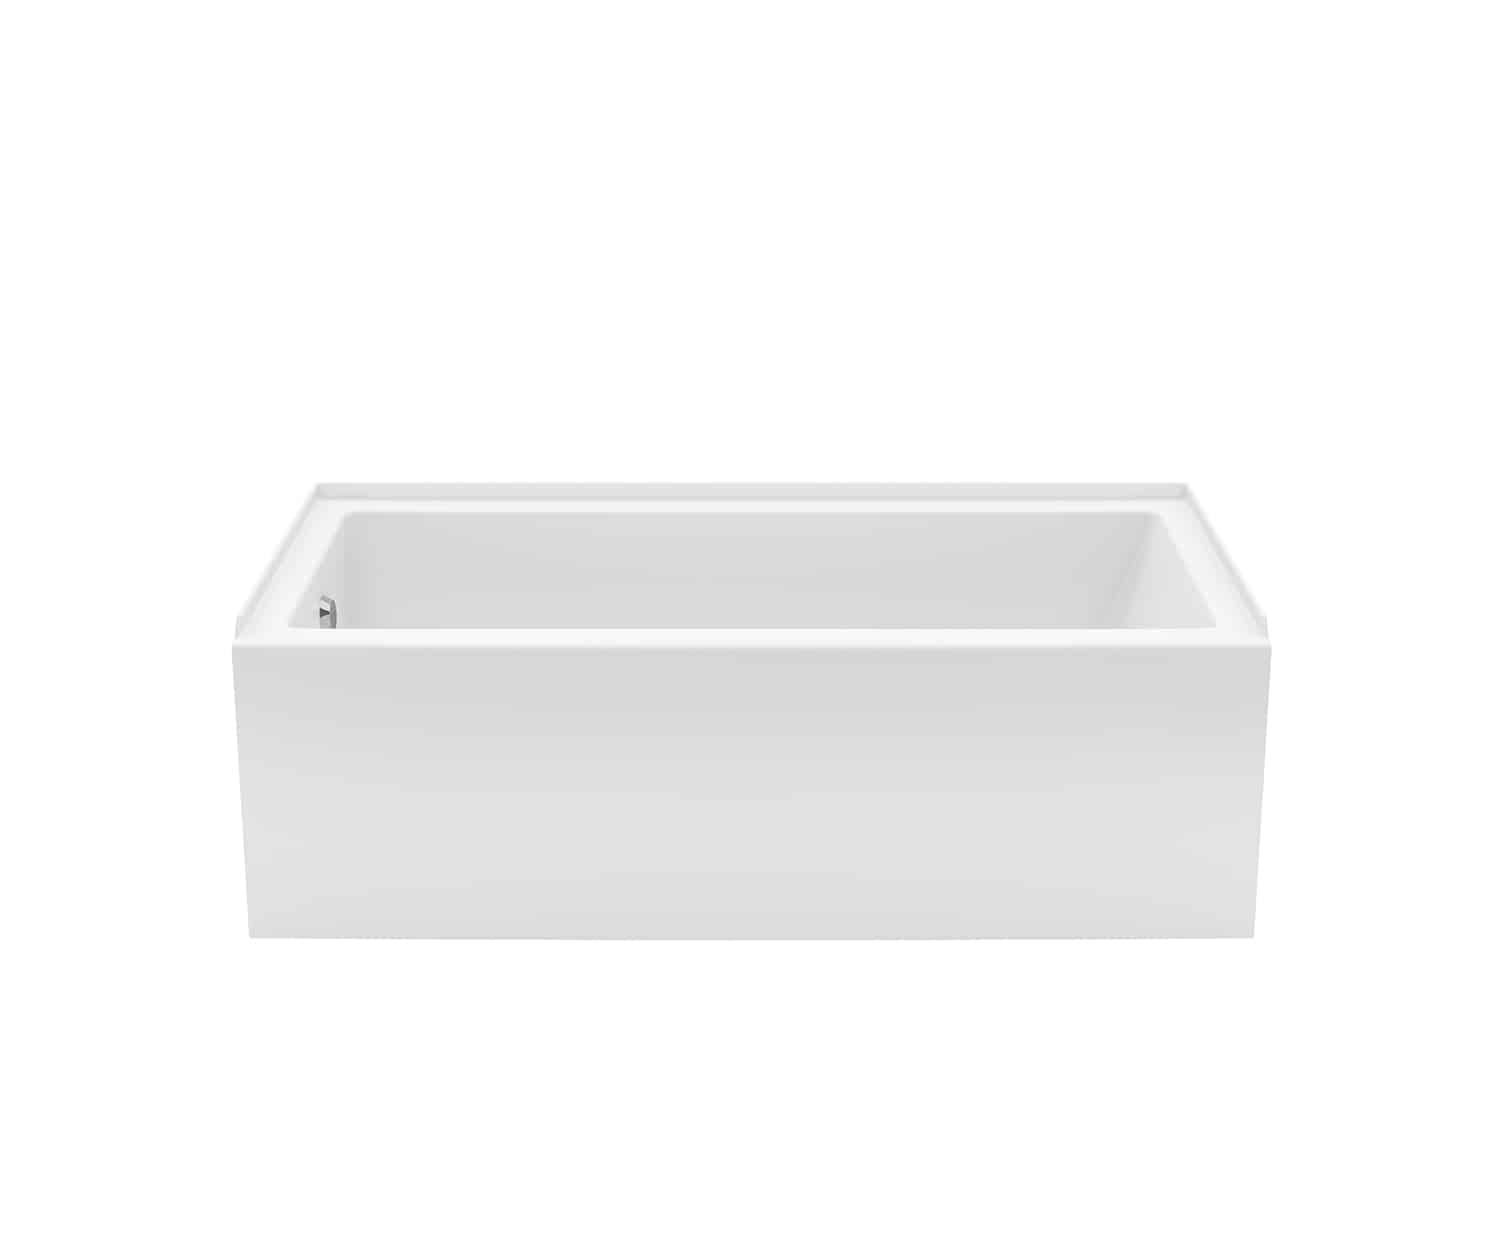 60” x 30” x 18” deep acrylic bathtub and shower replacement